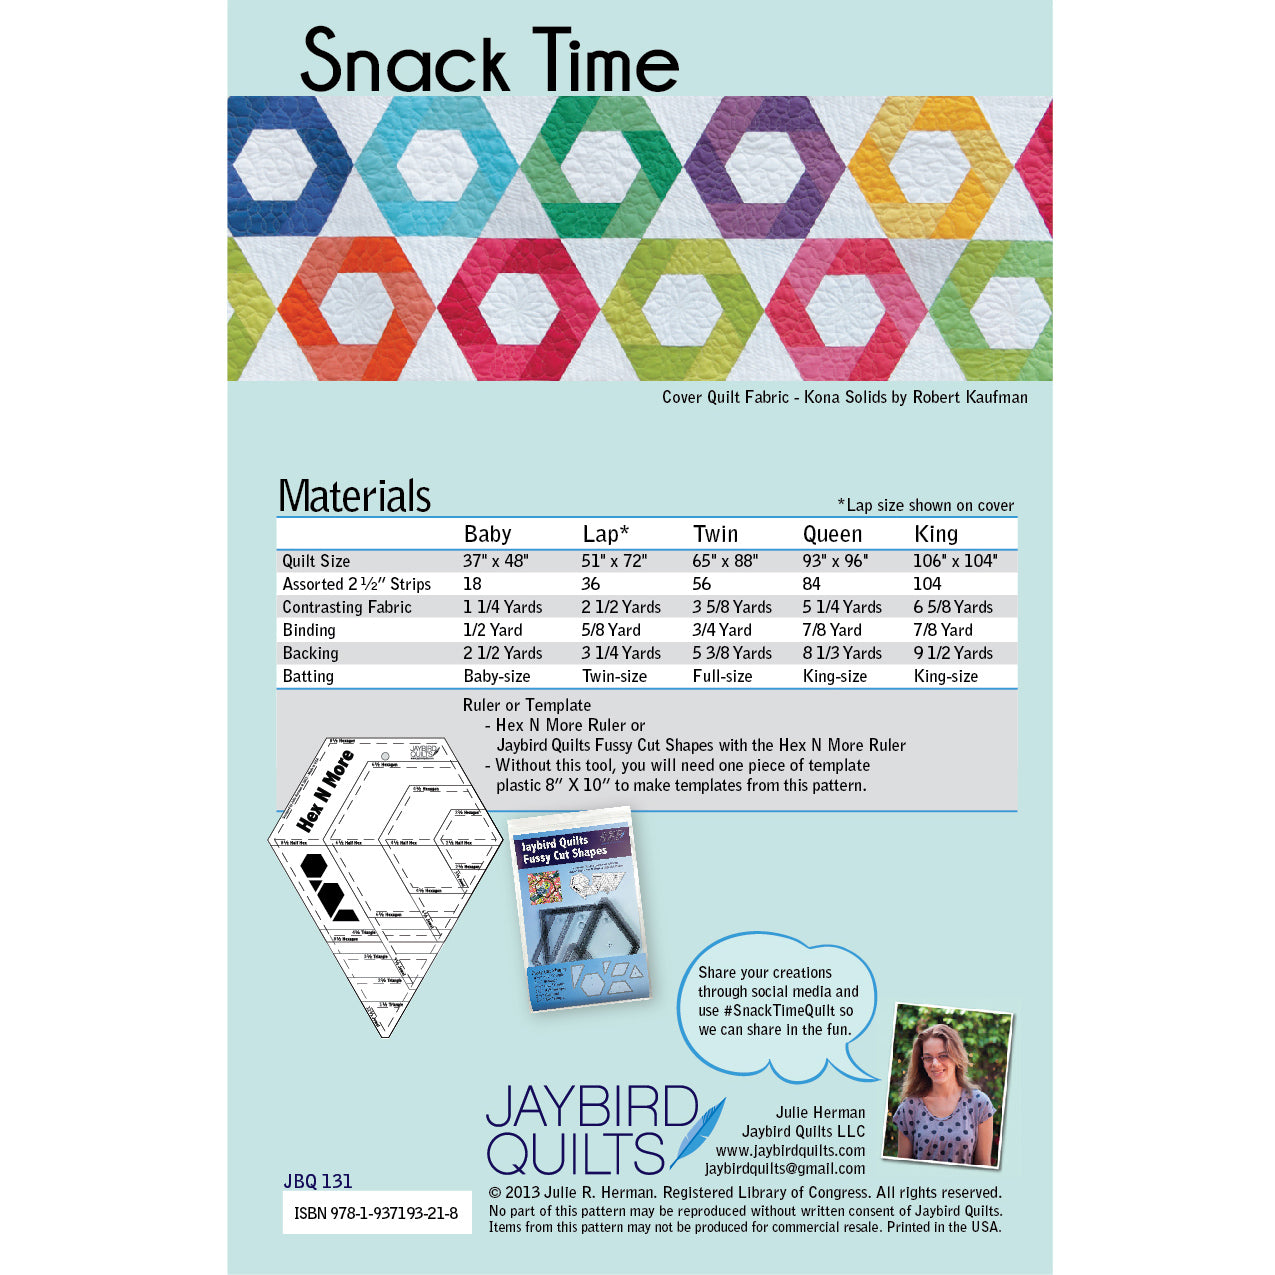 Snack Time Quilt PDF Pattern